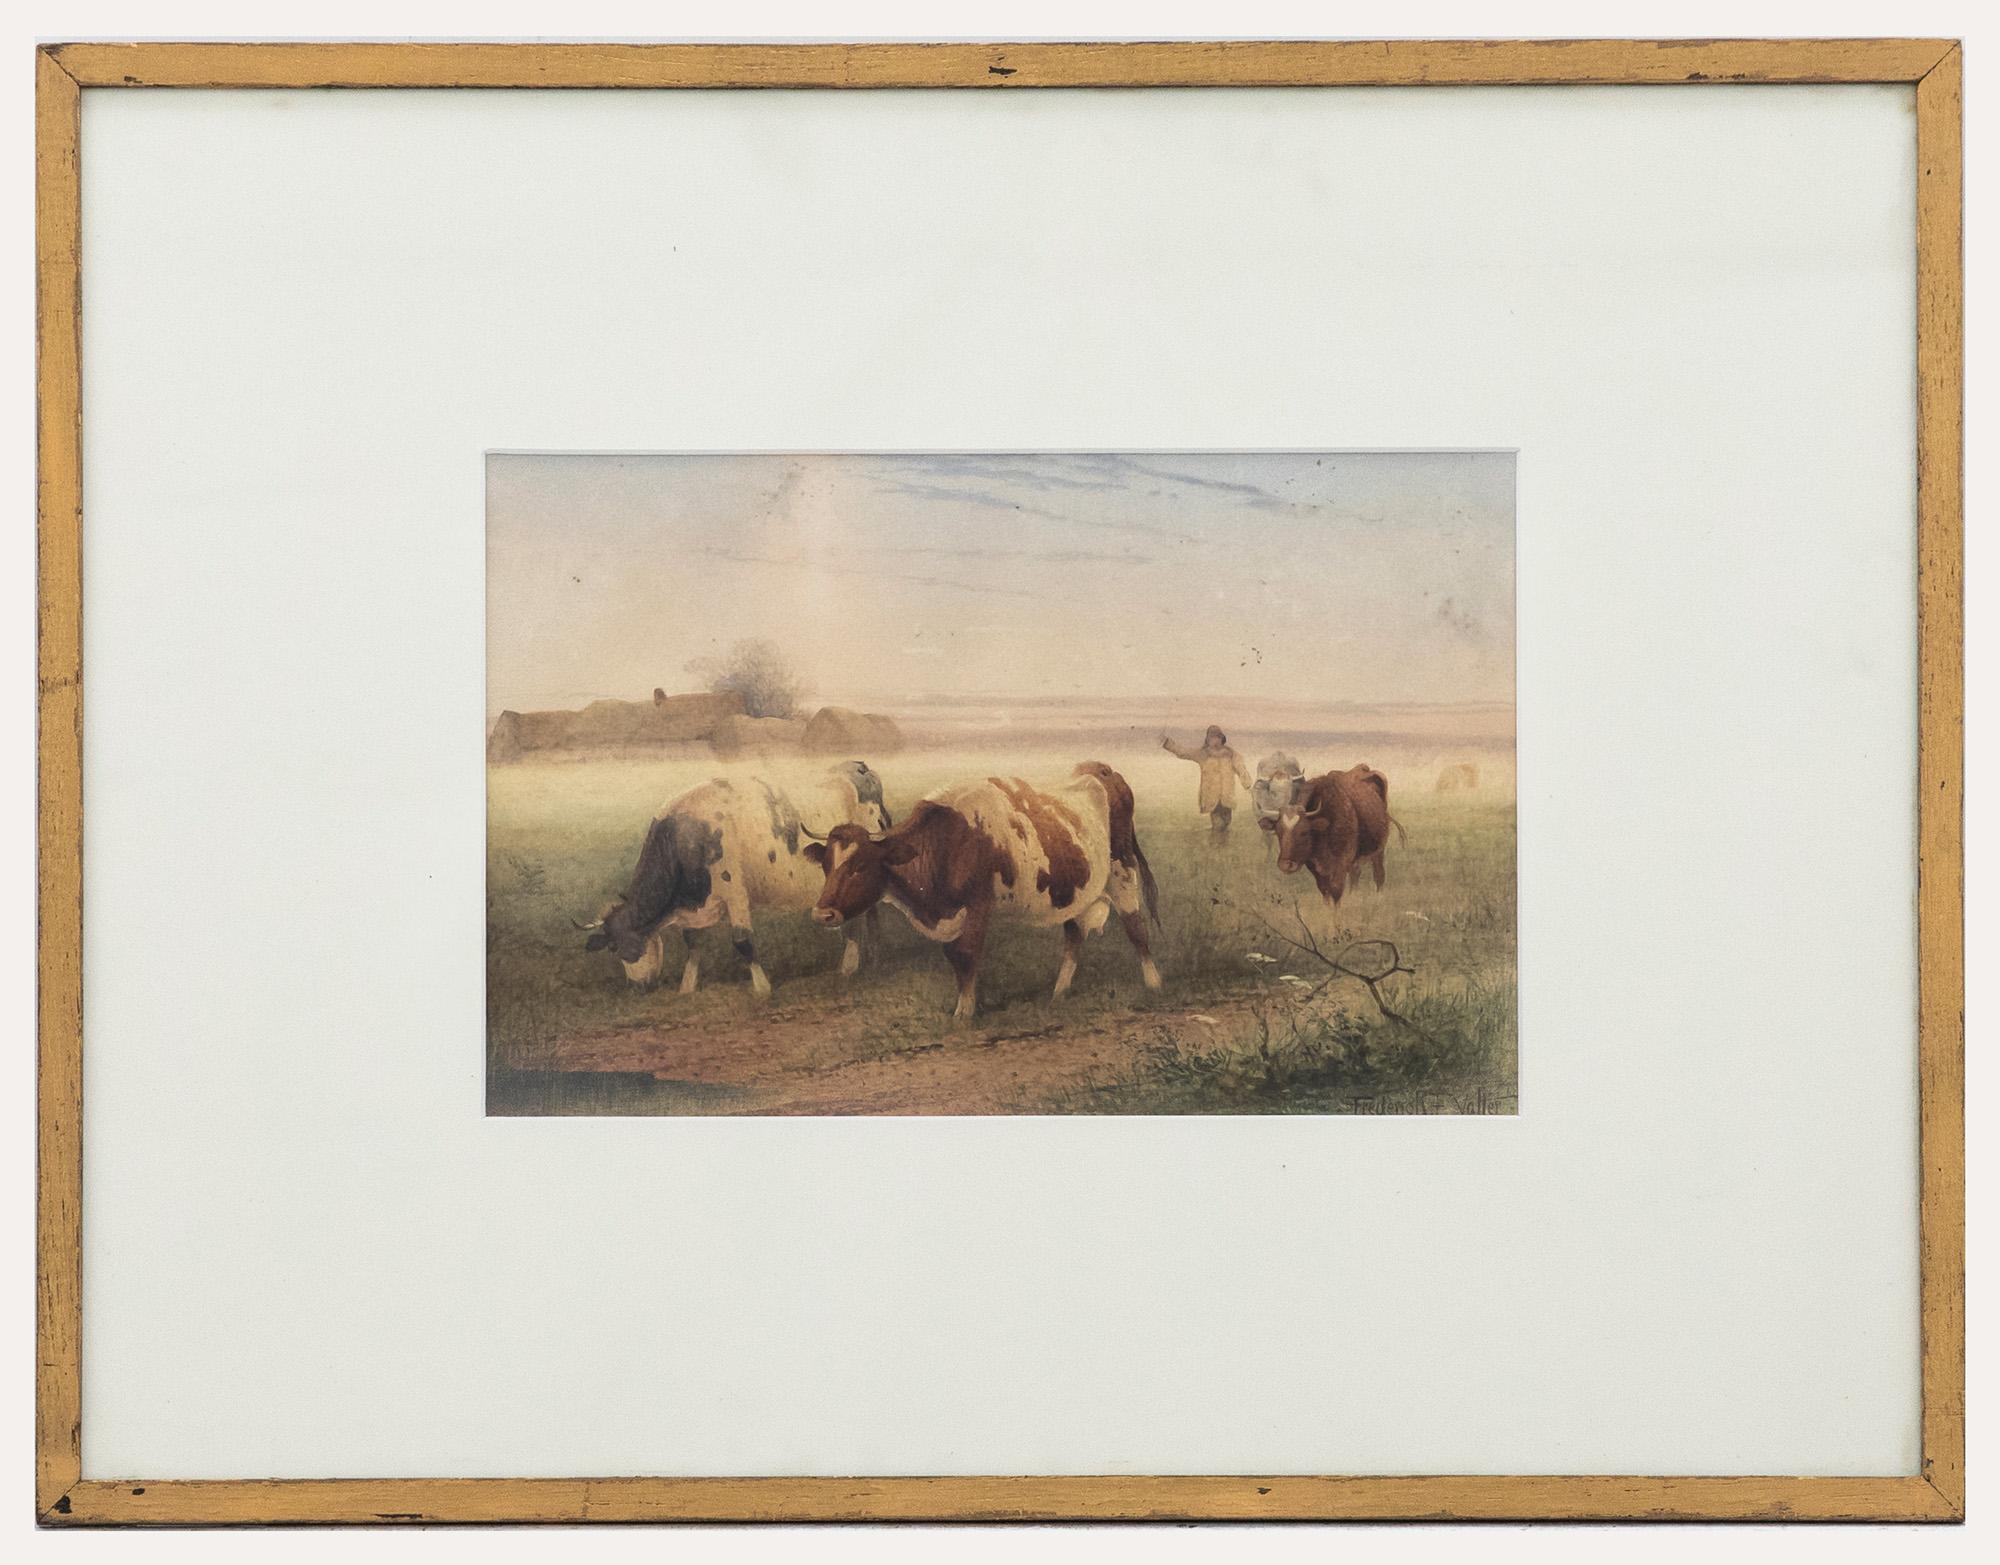 Unknown Landscape Art - Frederick E Valter (1860-1930) - Framed Watercolour, Drover with Cows for Market